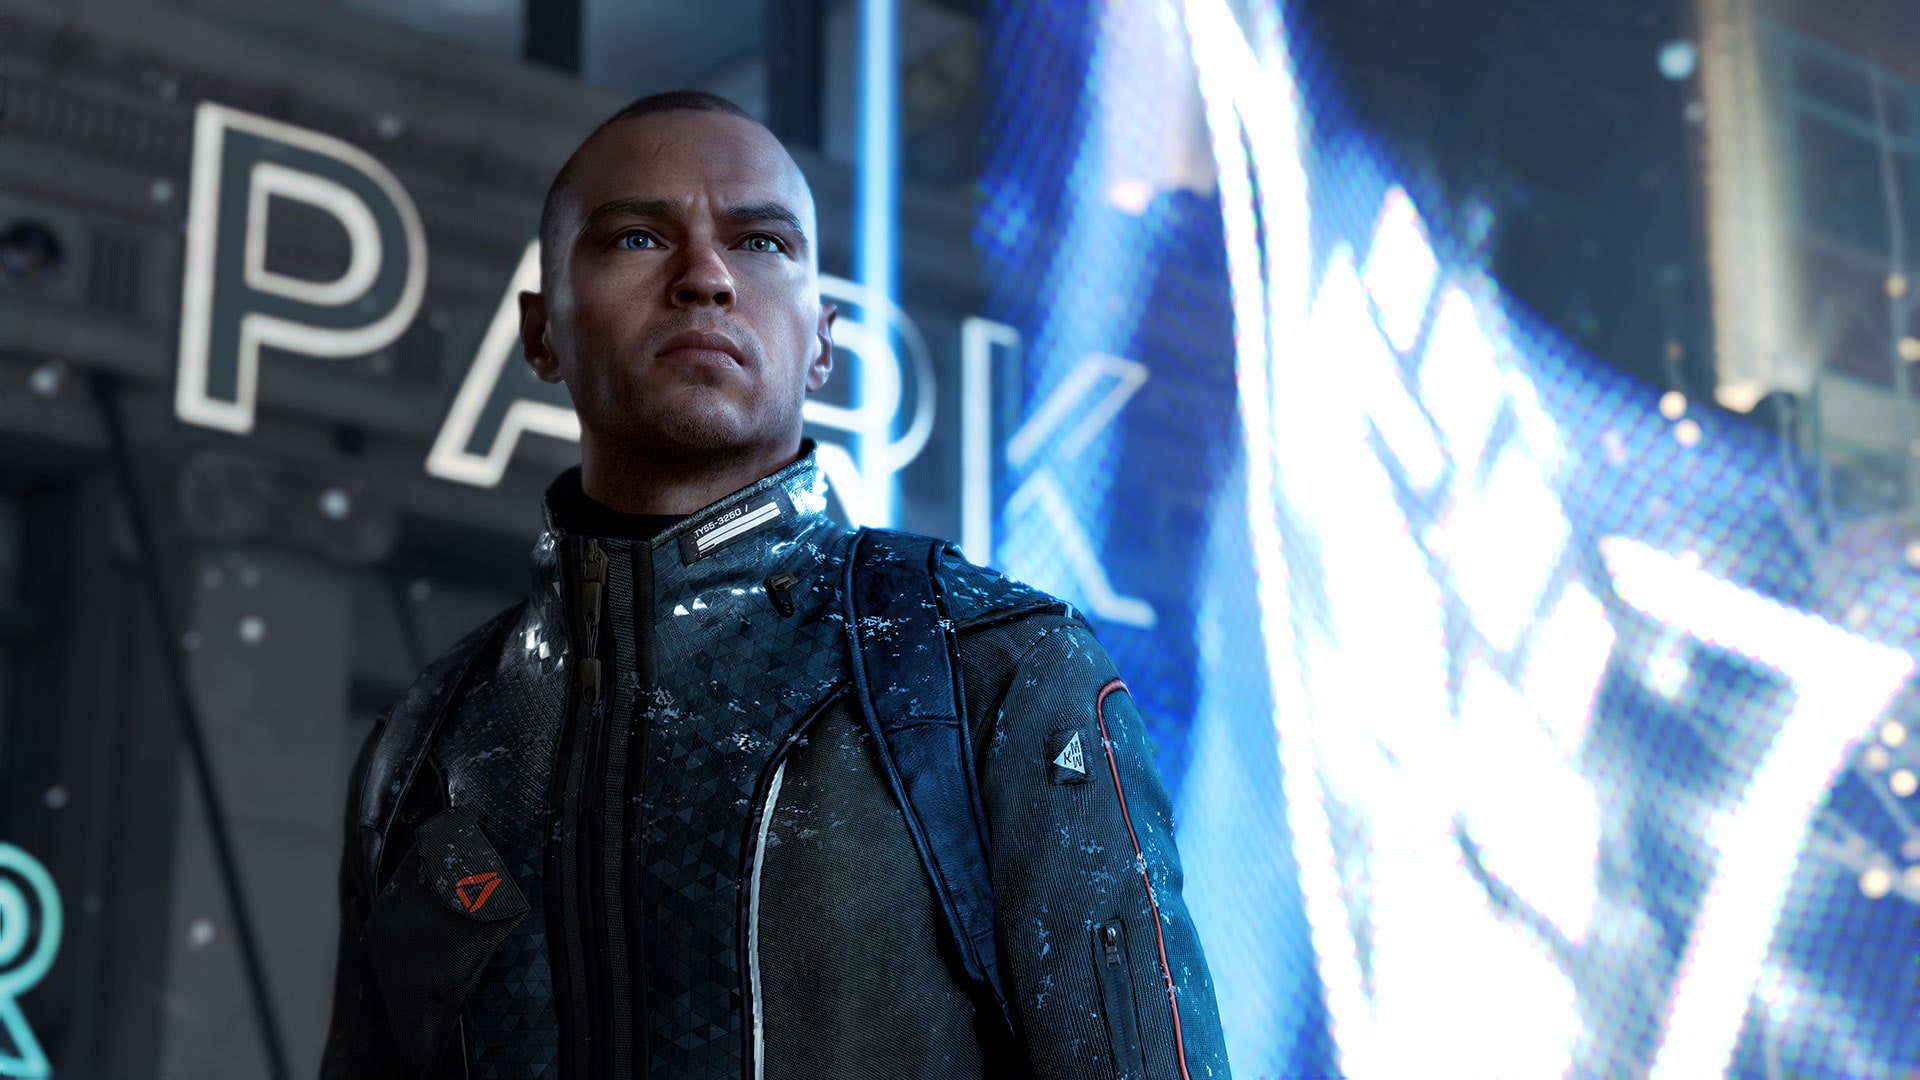 detroit become human playstation store